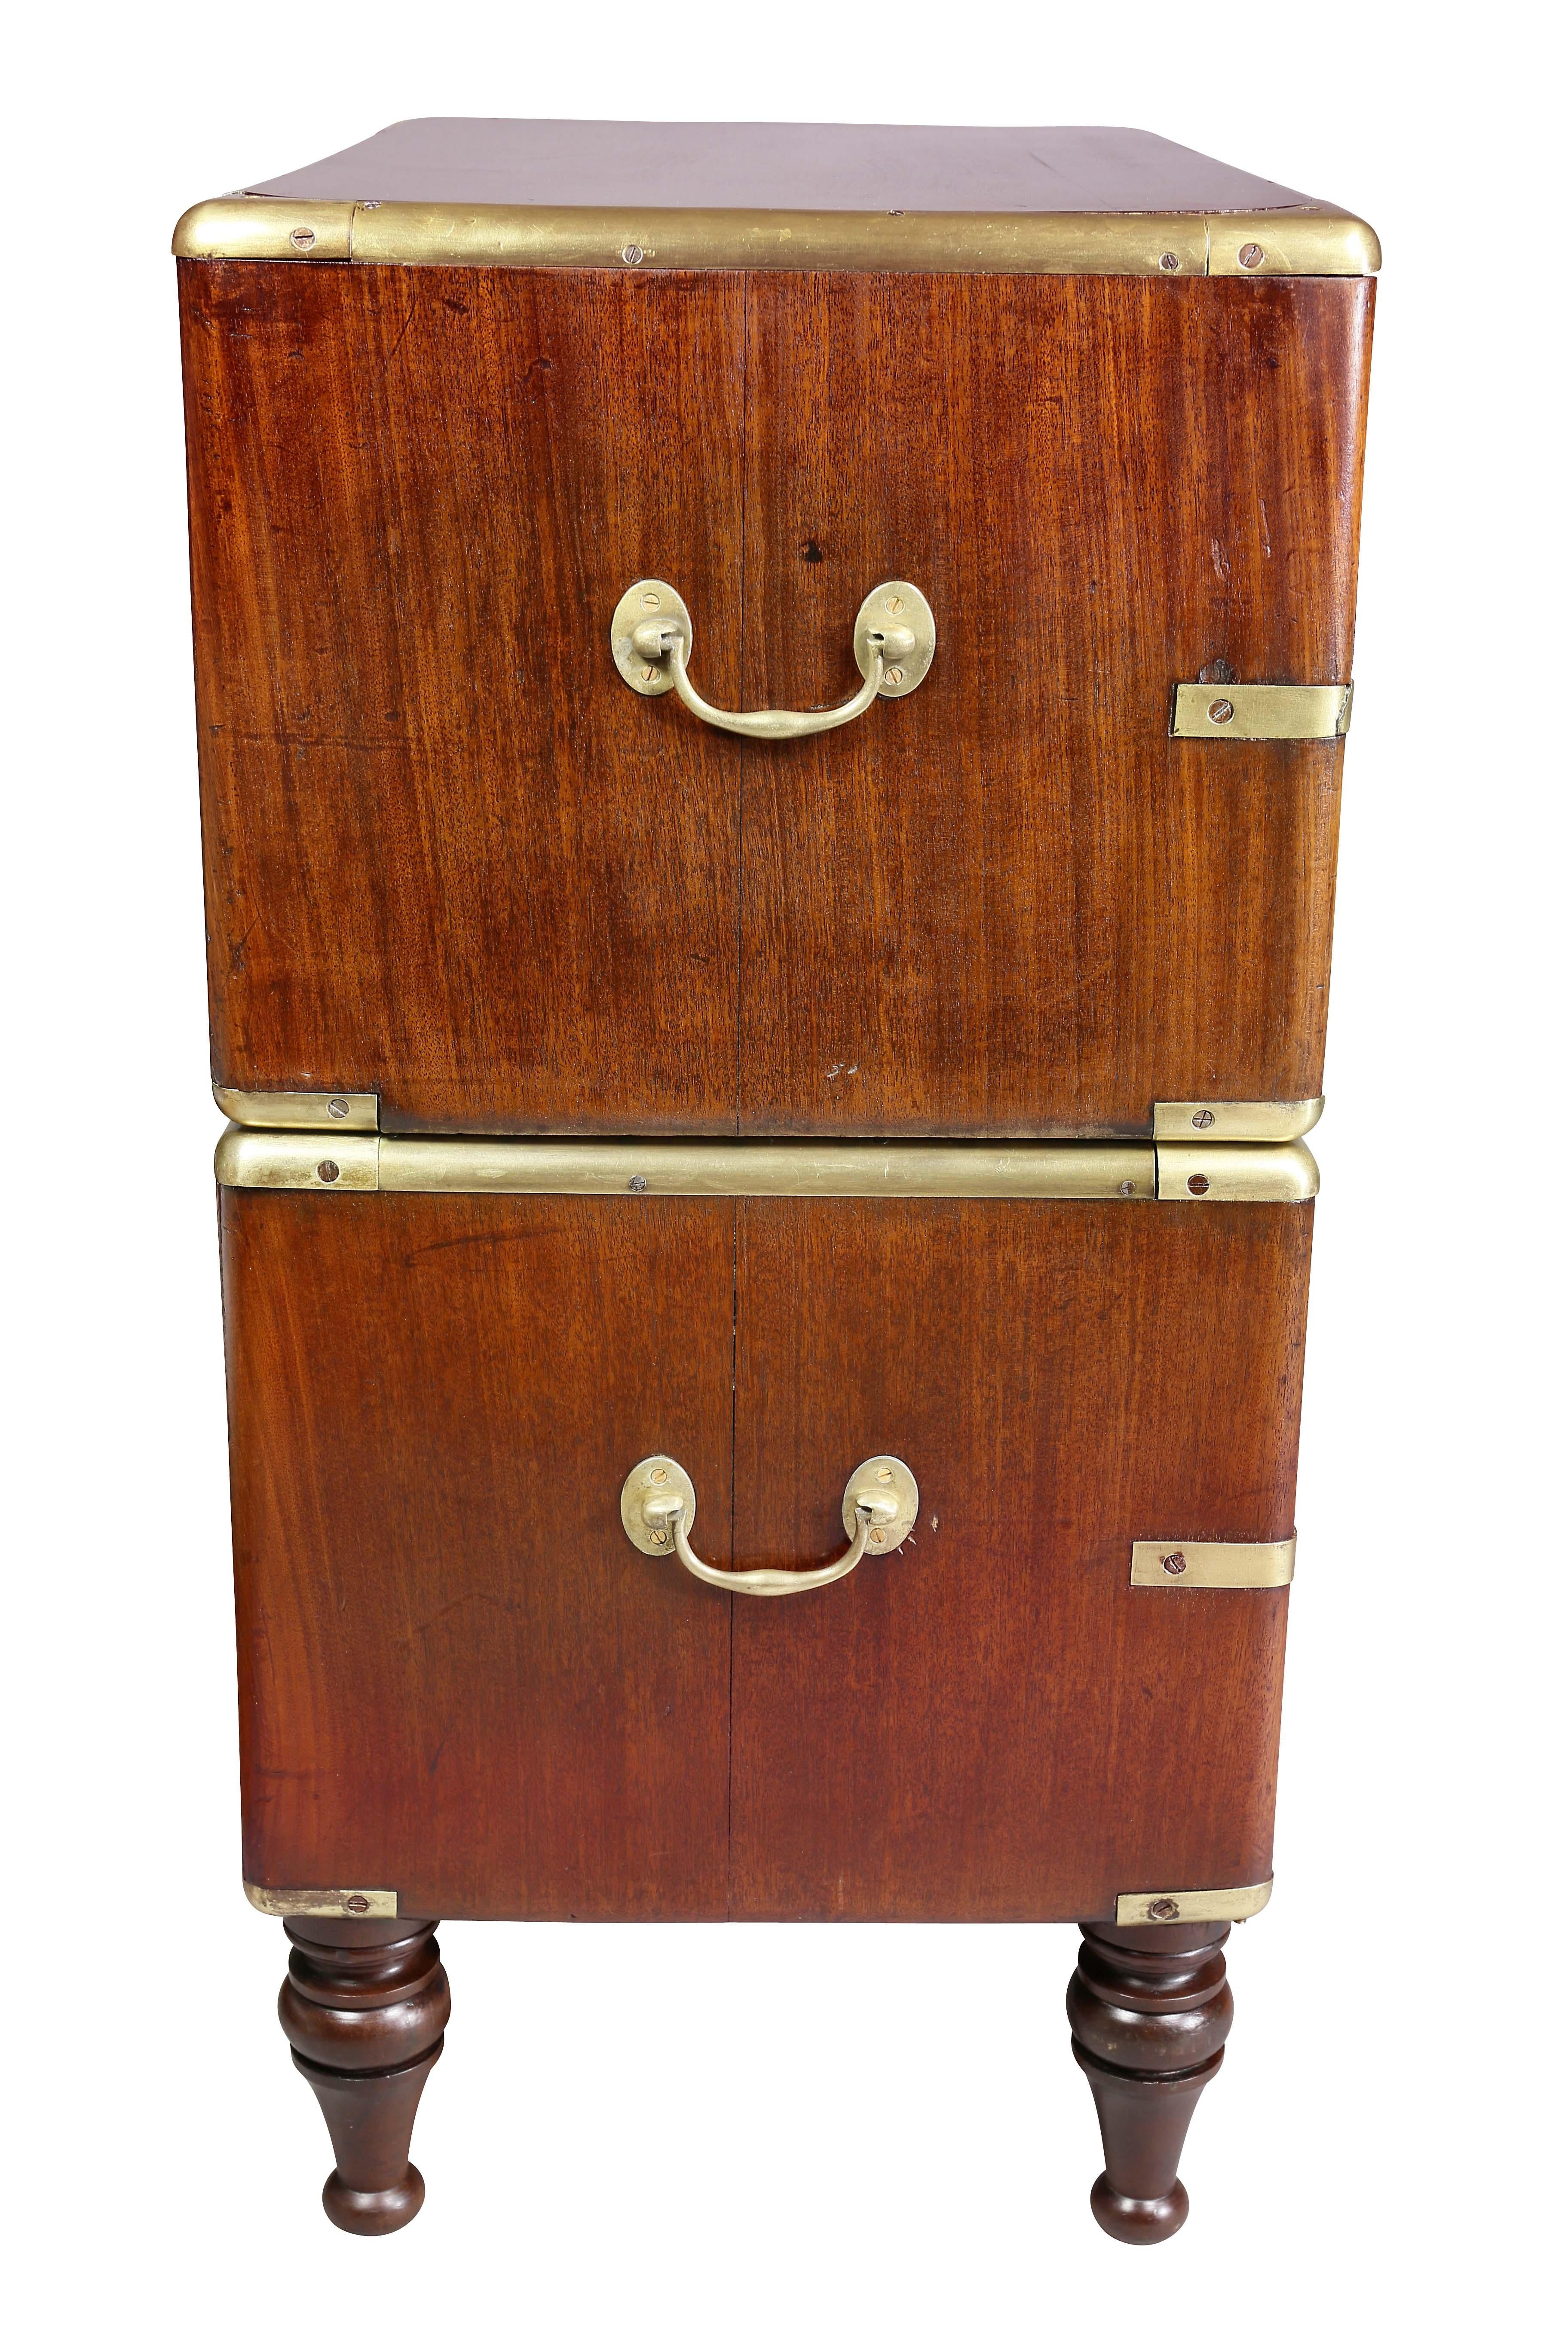 Early 19th Century Regency Mahogany and Brass Bound Campaign Chest